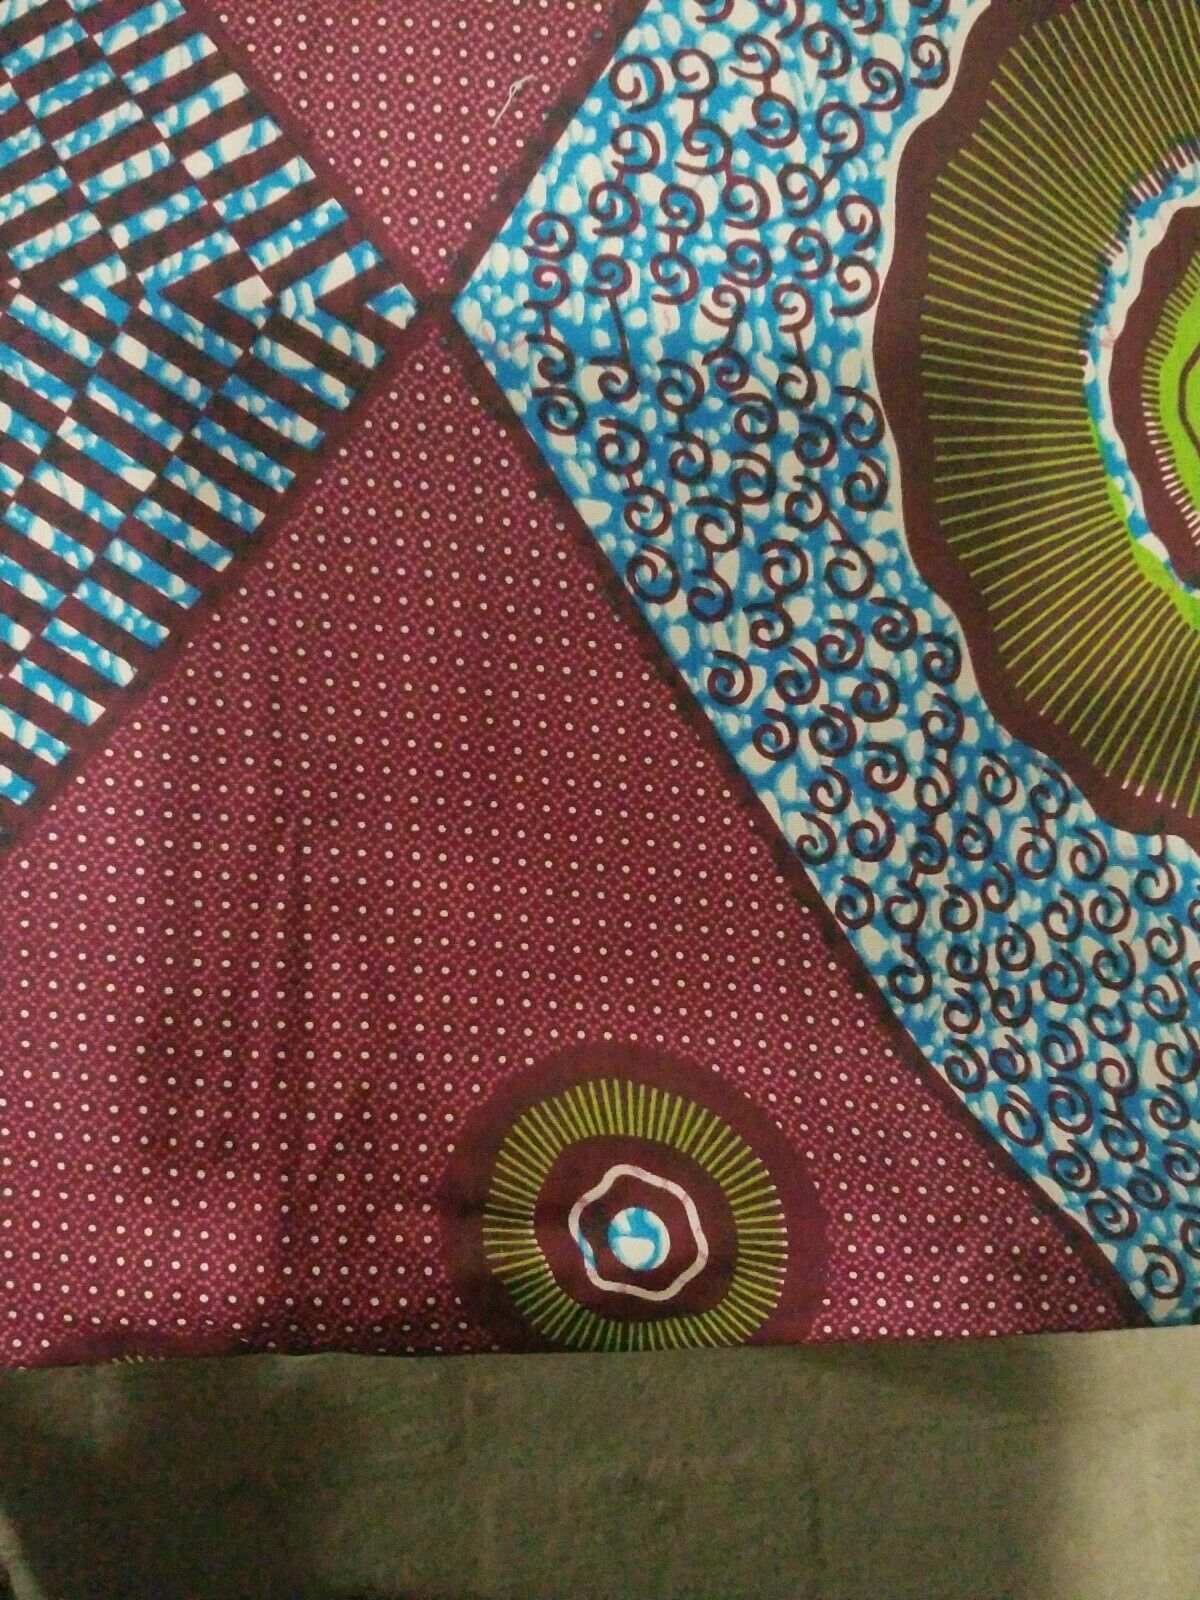 Brown MultiAfrican Print 100% Cotton Fabric ~6yards×46"~$32 SALE $25!!!!